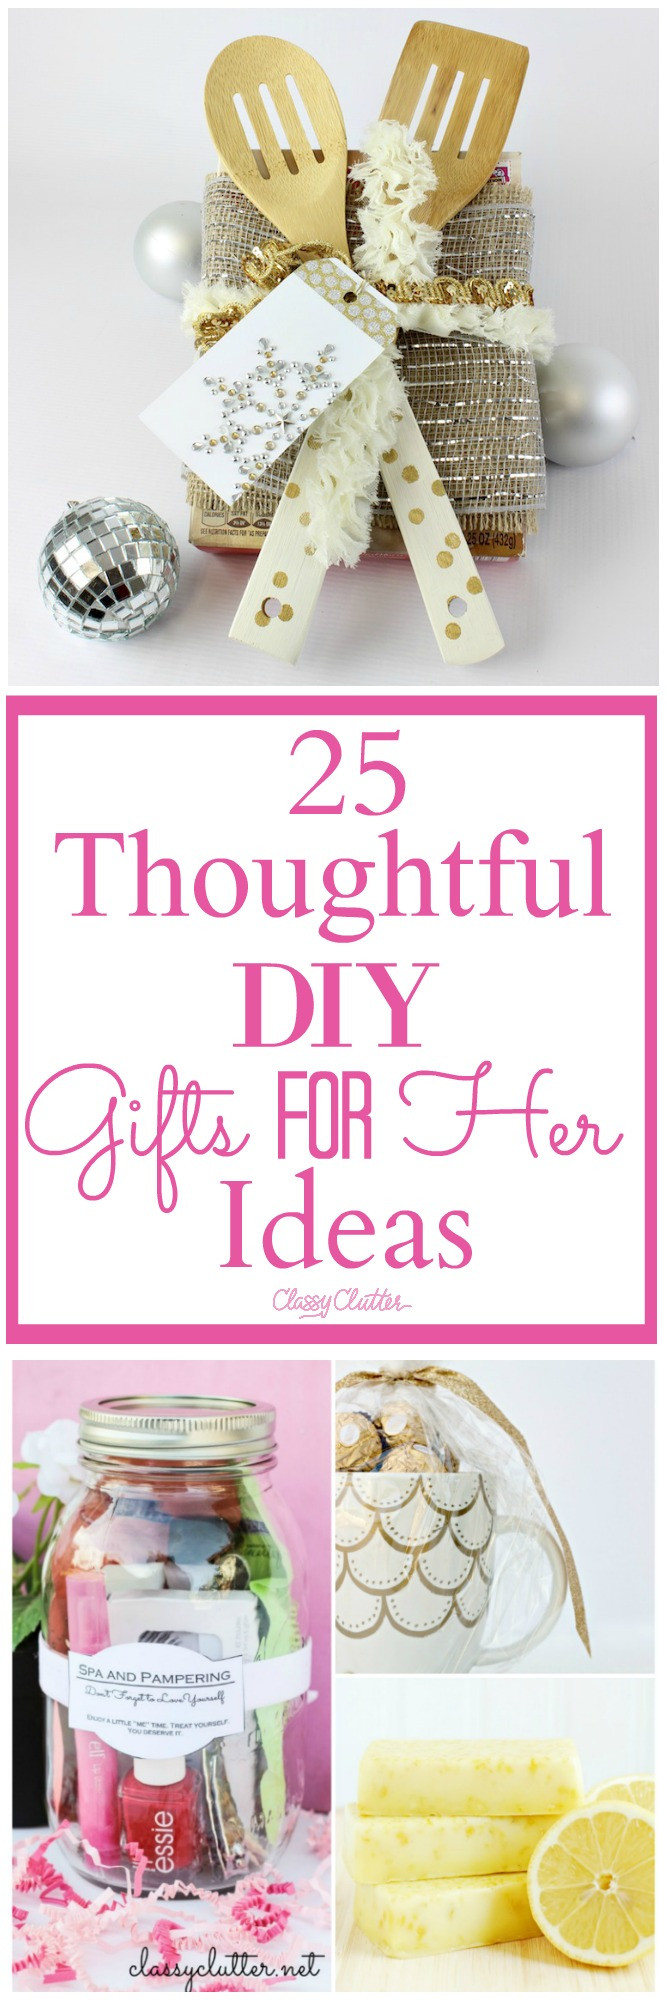 Gift Baskets Ideas For Her
 25 Thoughtful DIY Gifts for Her Ideas Classy Clutter